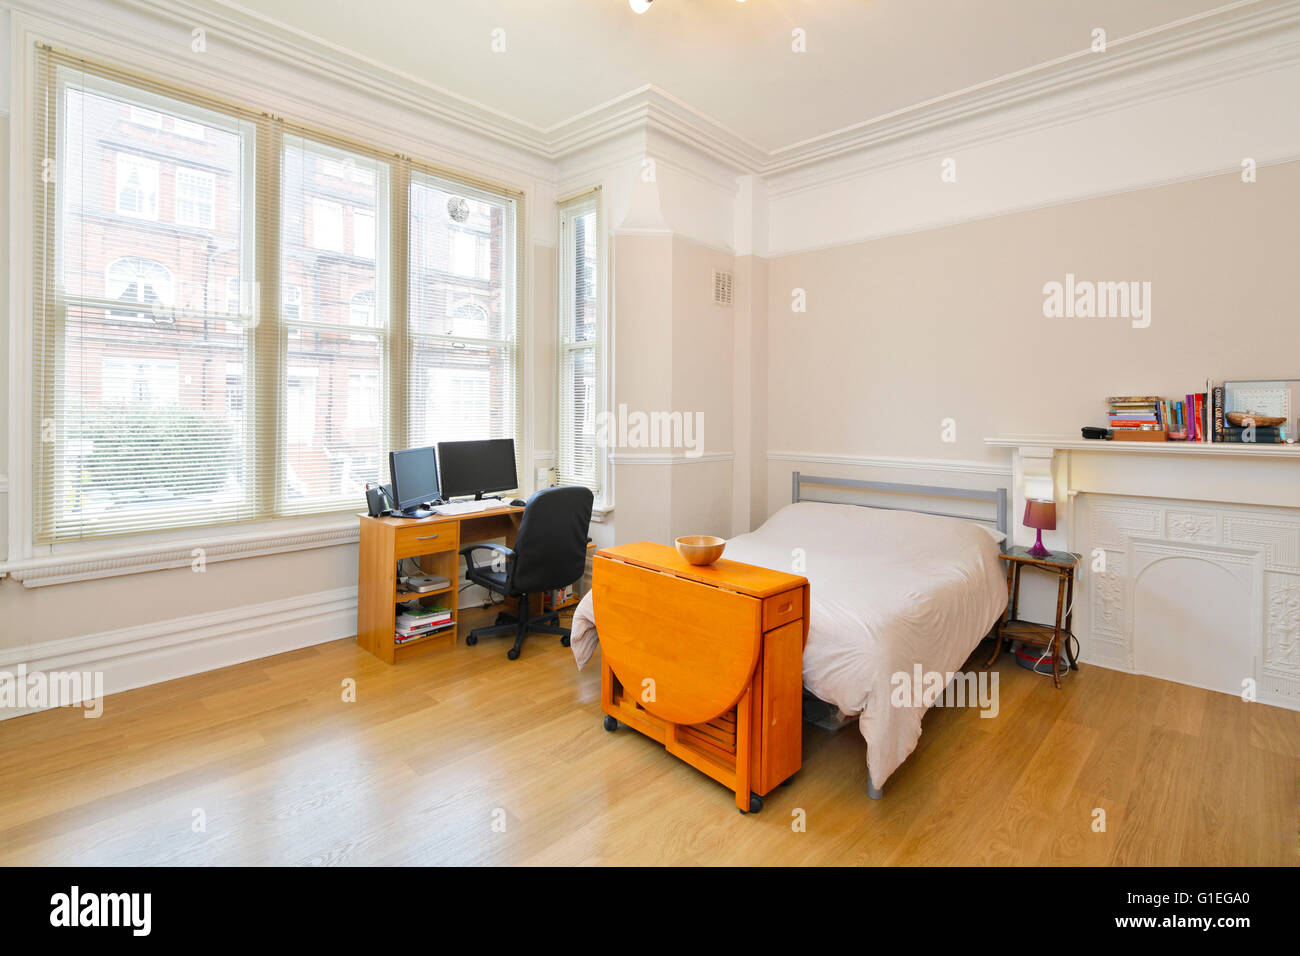 Canfield Gardens, West Hampstead. Bedroom with minimal furniture and contemporary features. Wood floors and large windows. Stock Photo